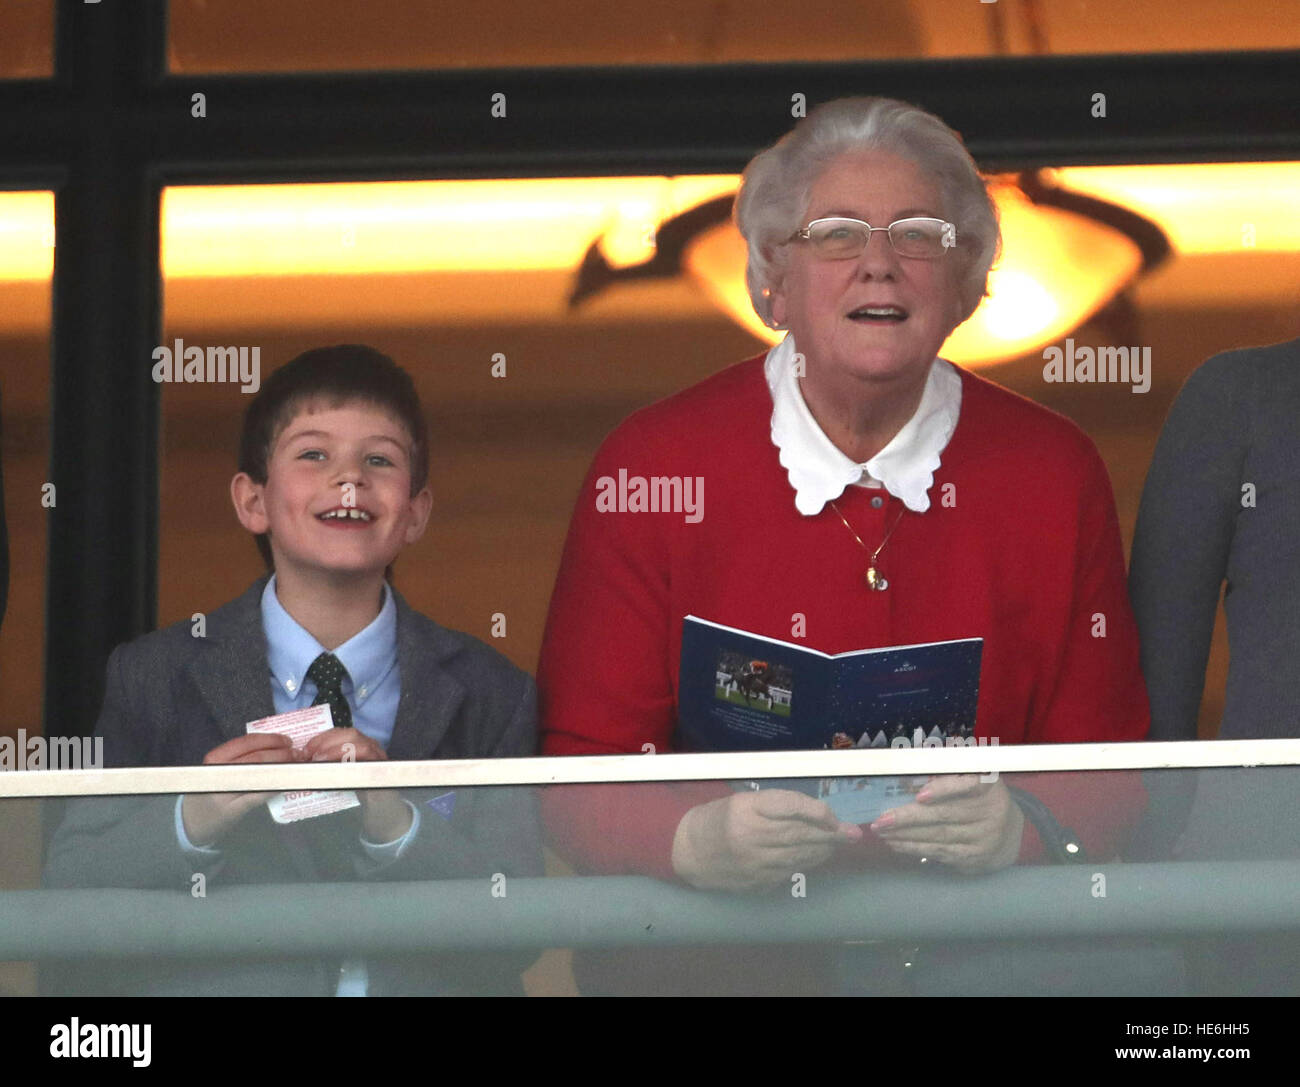 James, Viscount Severn, the son of the Earl and Countess of Wessex, watches the racing at Ascot, Berkshire. Stock Photo